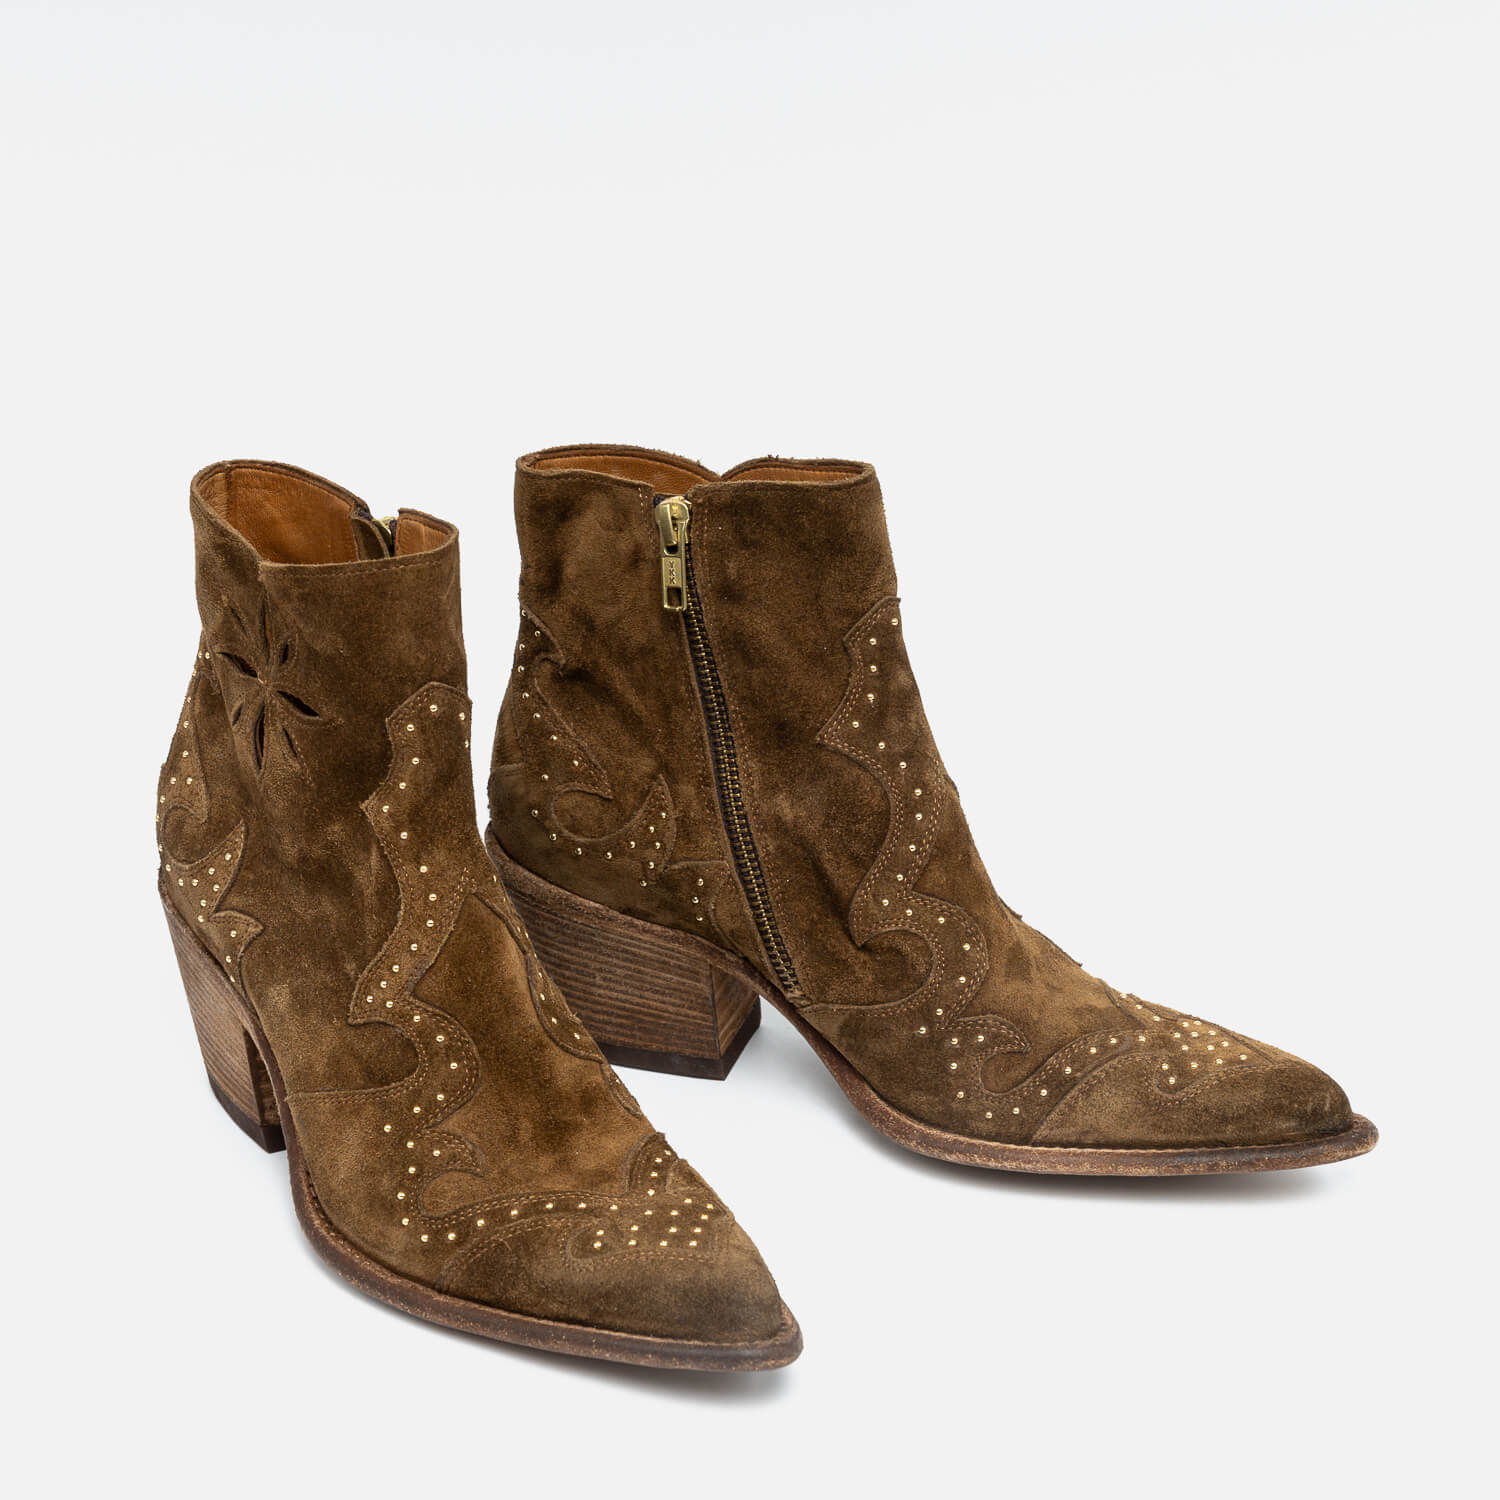 Antonella | Model 3733 Texan-style boots beer-colored